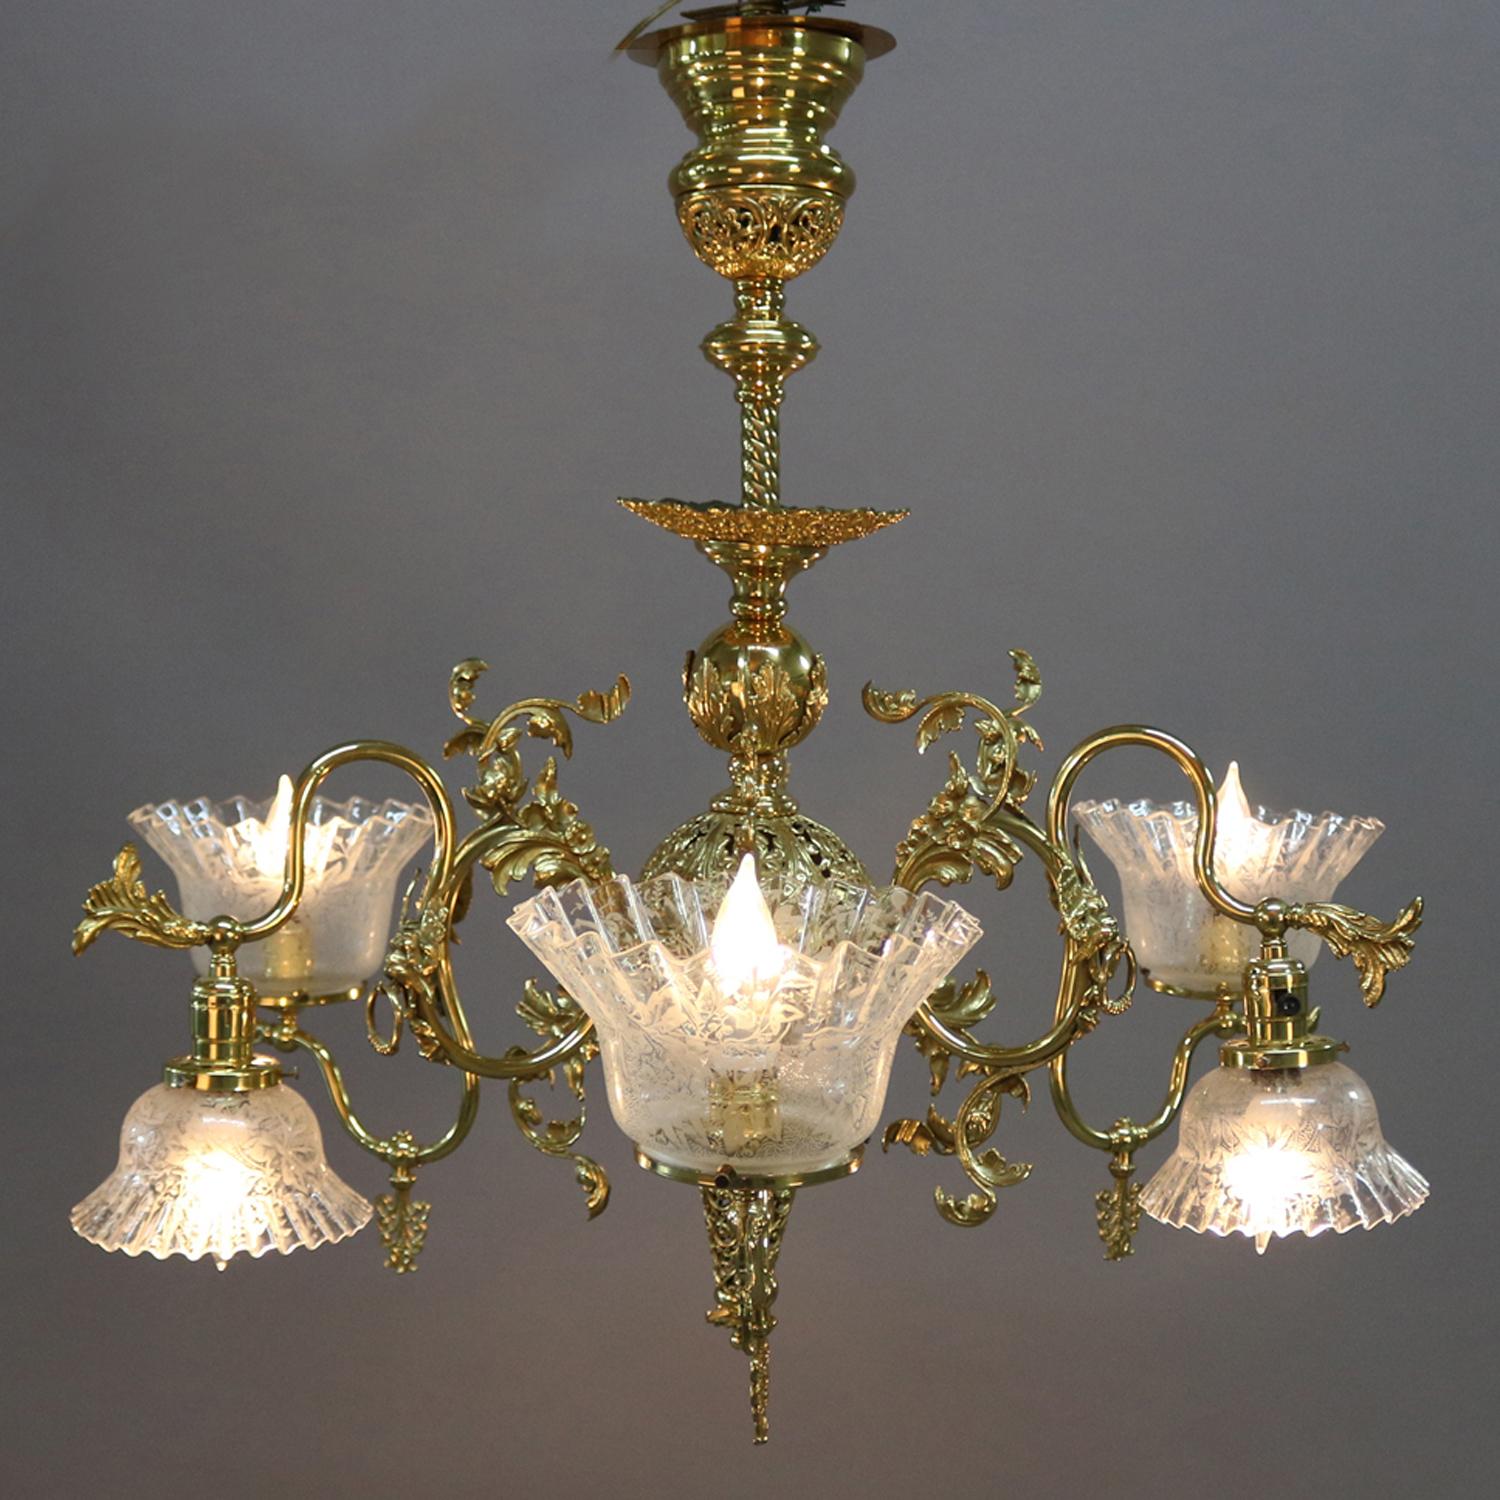 Cornelius School chandelier features gilt cast white metal frame with central pierced foliate drop finial and font with six scroll and foliate form arms terminating in up and down independently controlled lights having foliate etched shades with